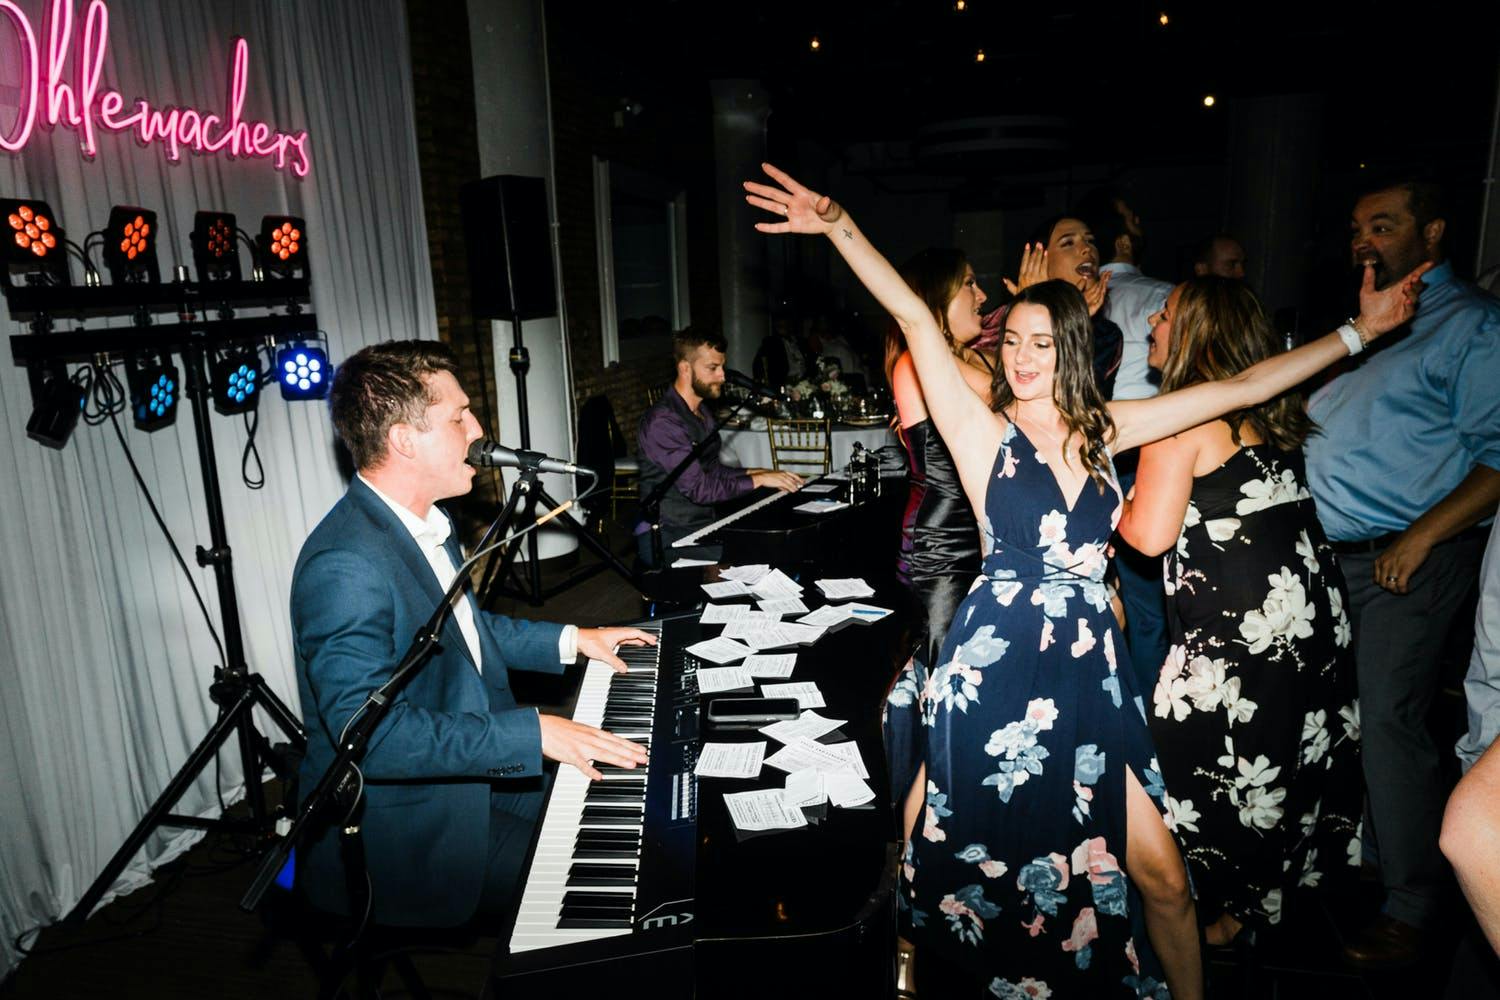 Wedding guest dances next to dueling pianos at wedding reception | PartySlate